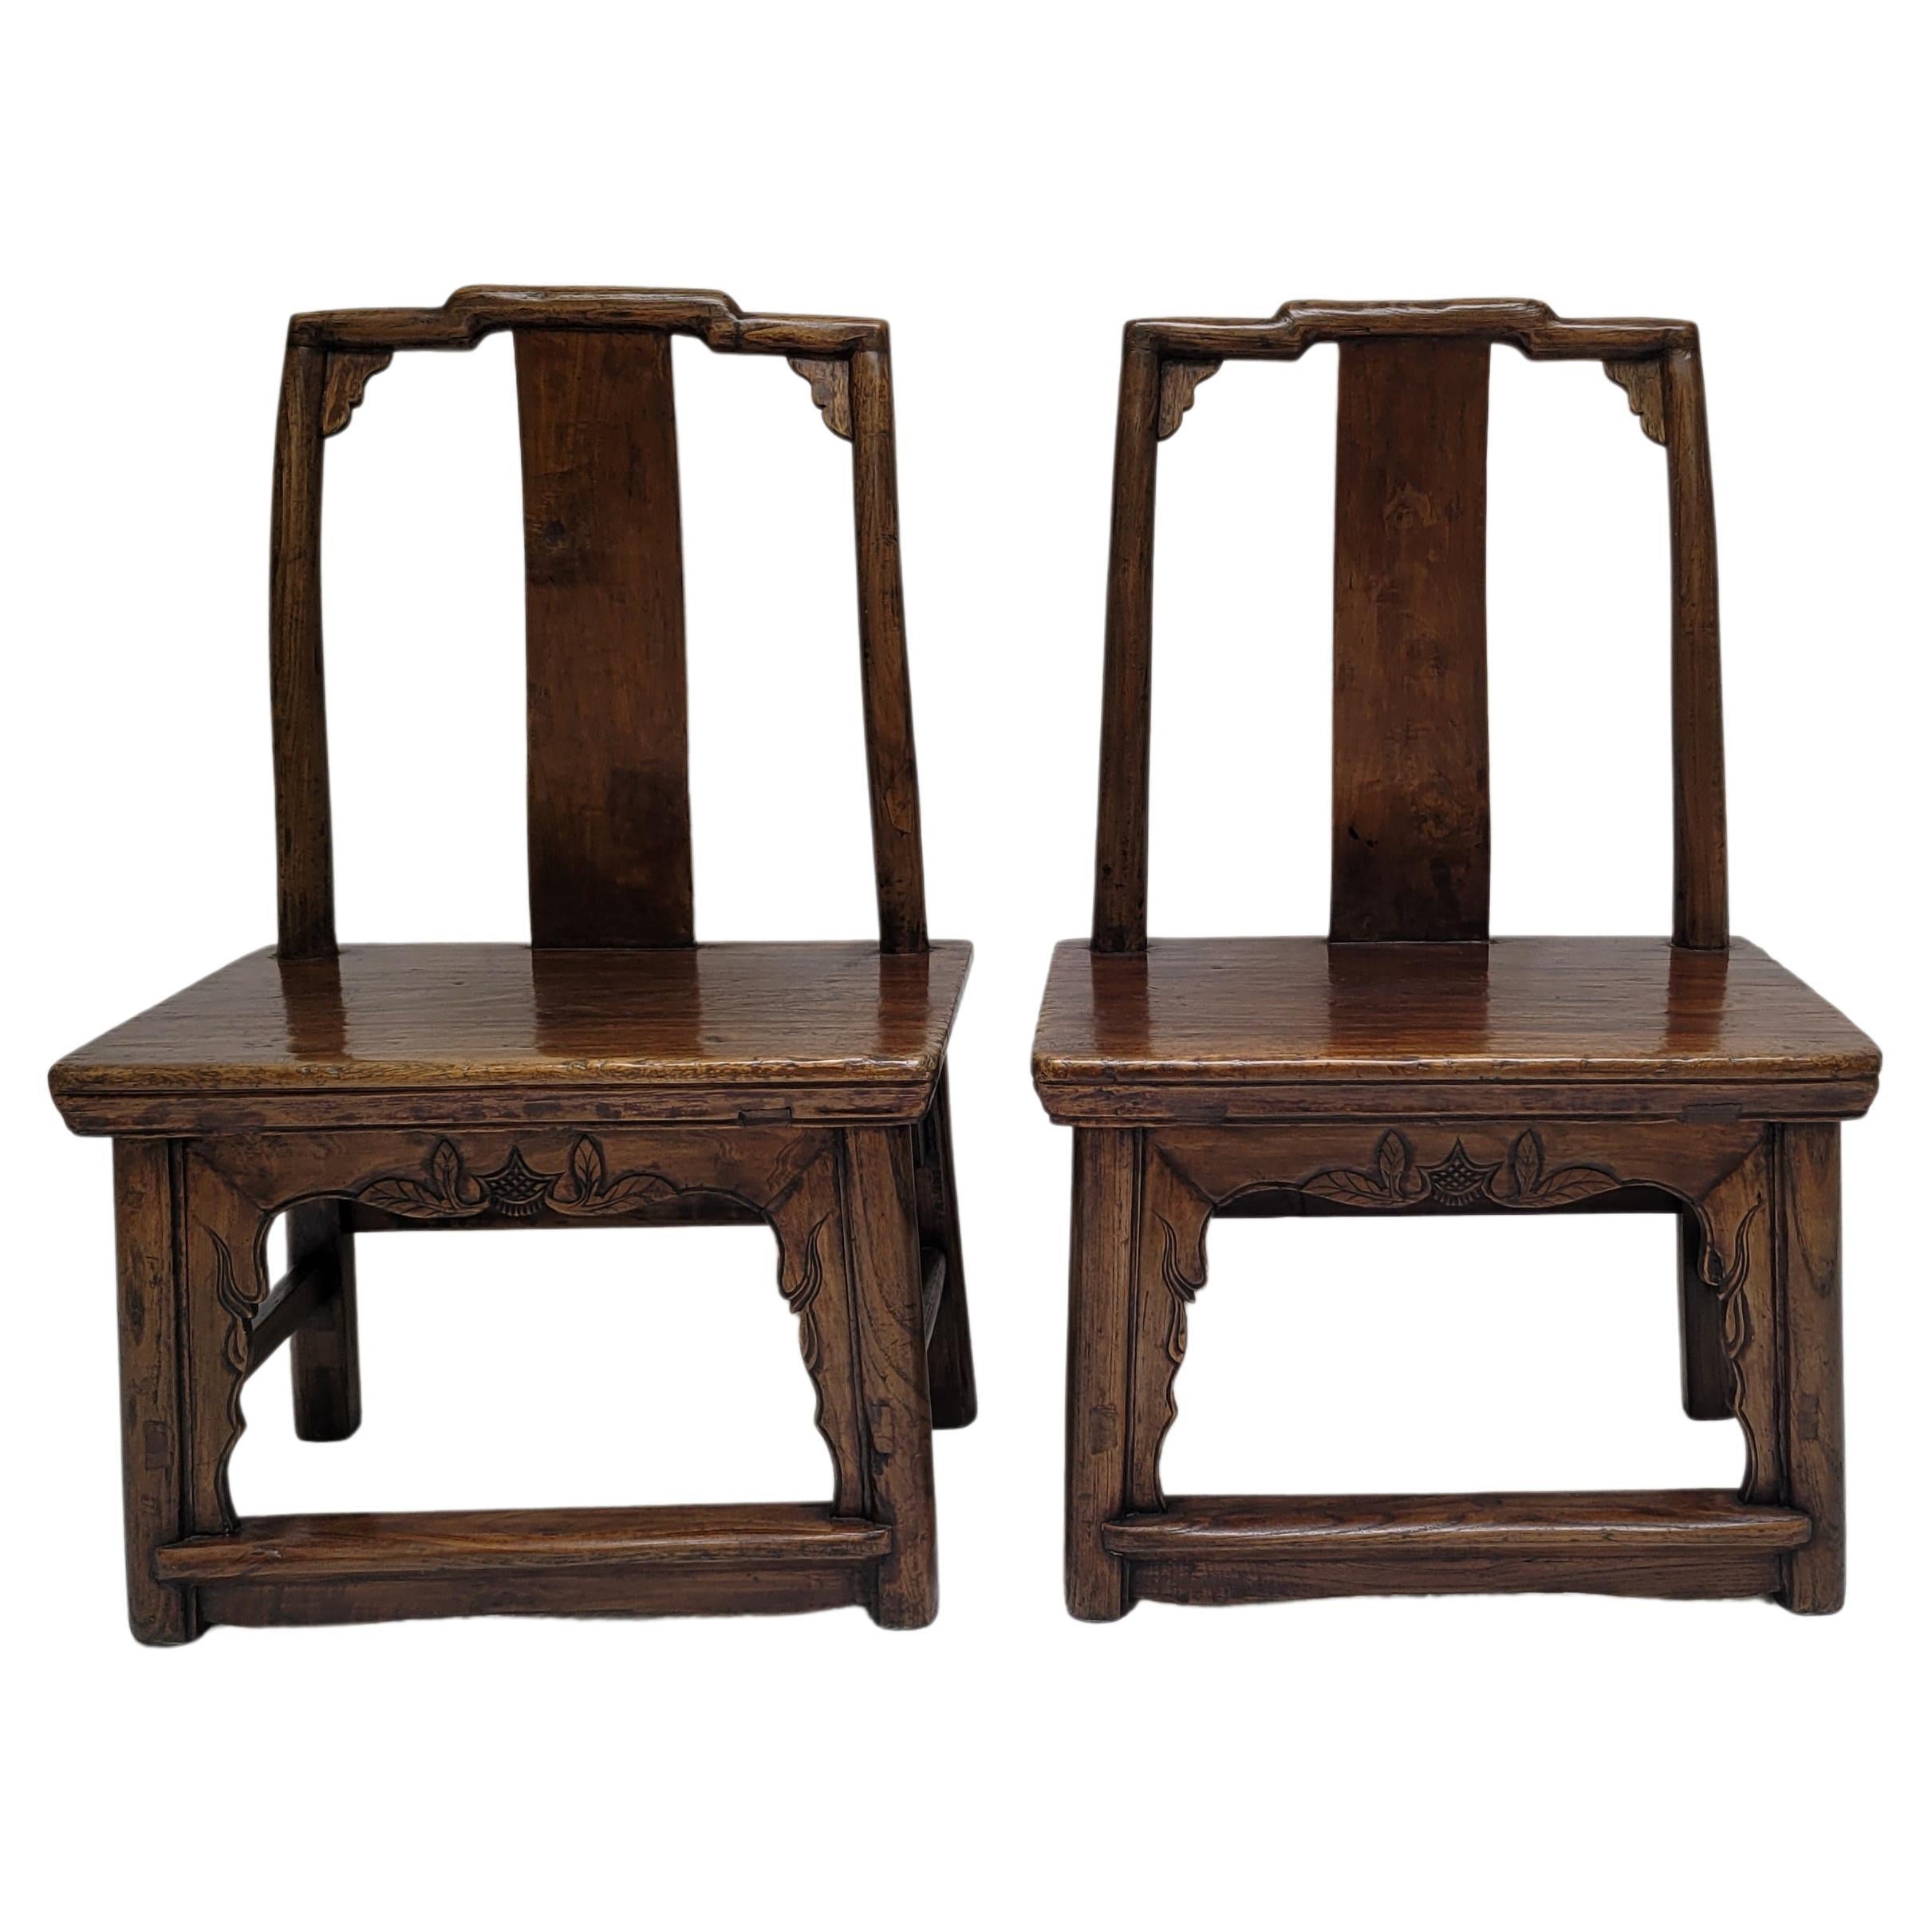 19th Century Pair of Children's Chairs For Sale